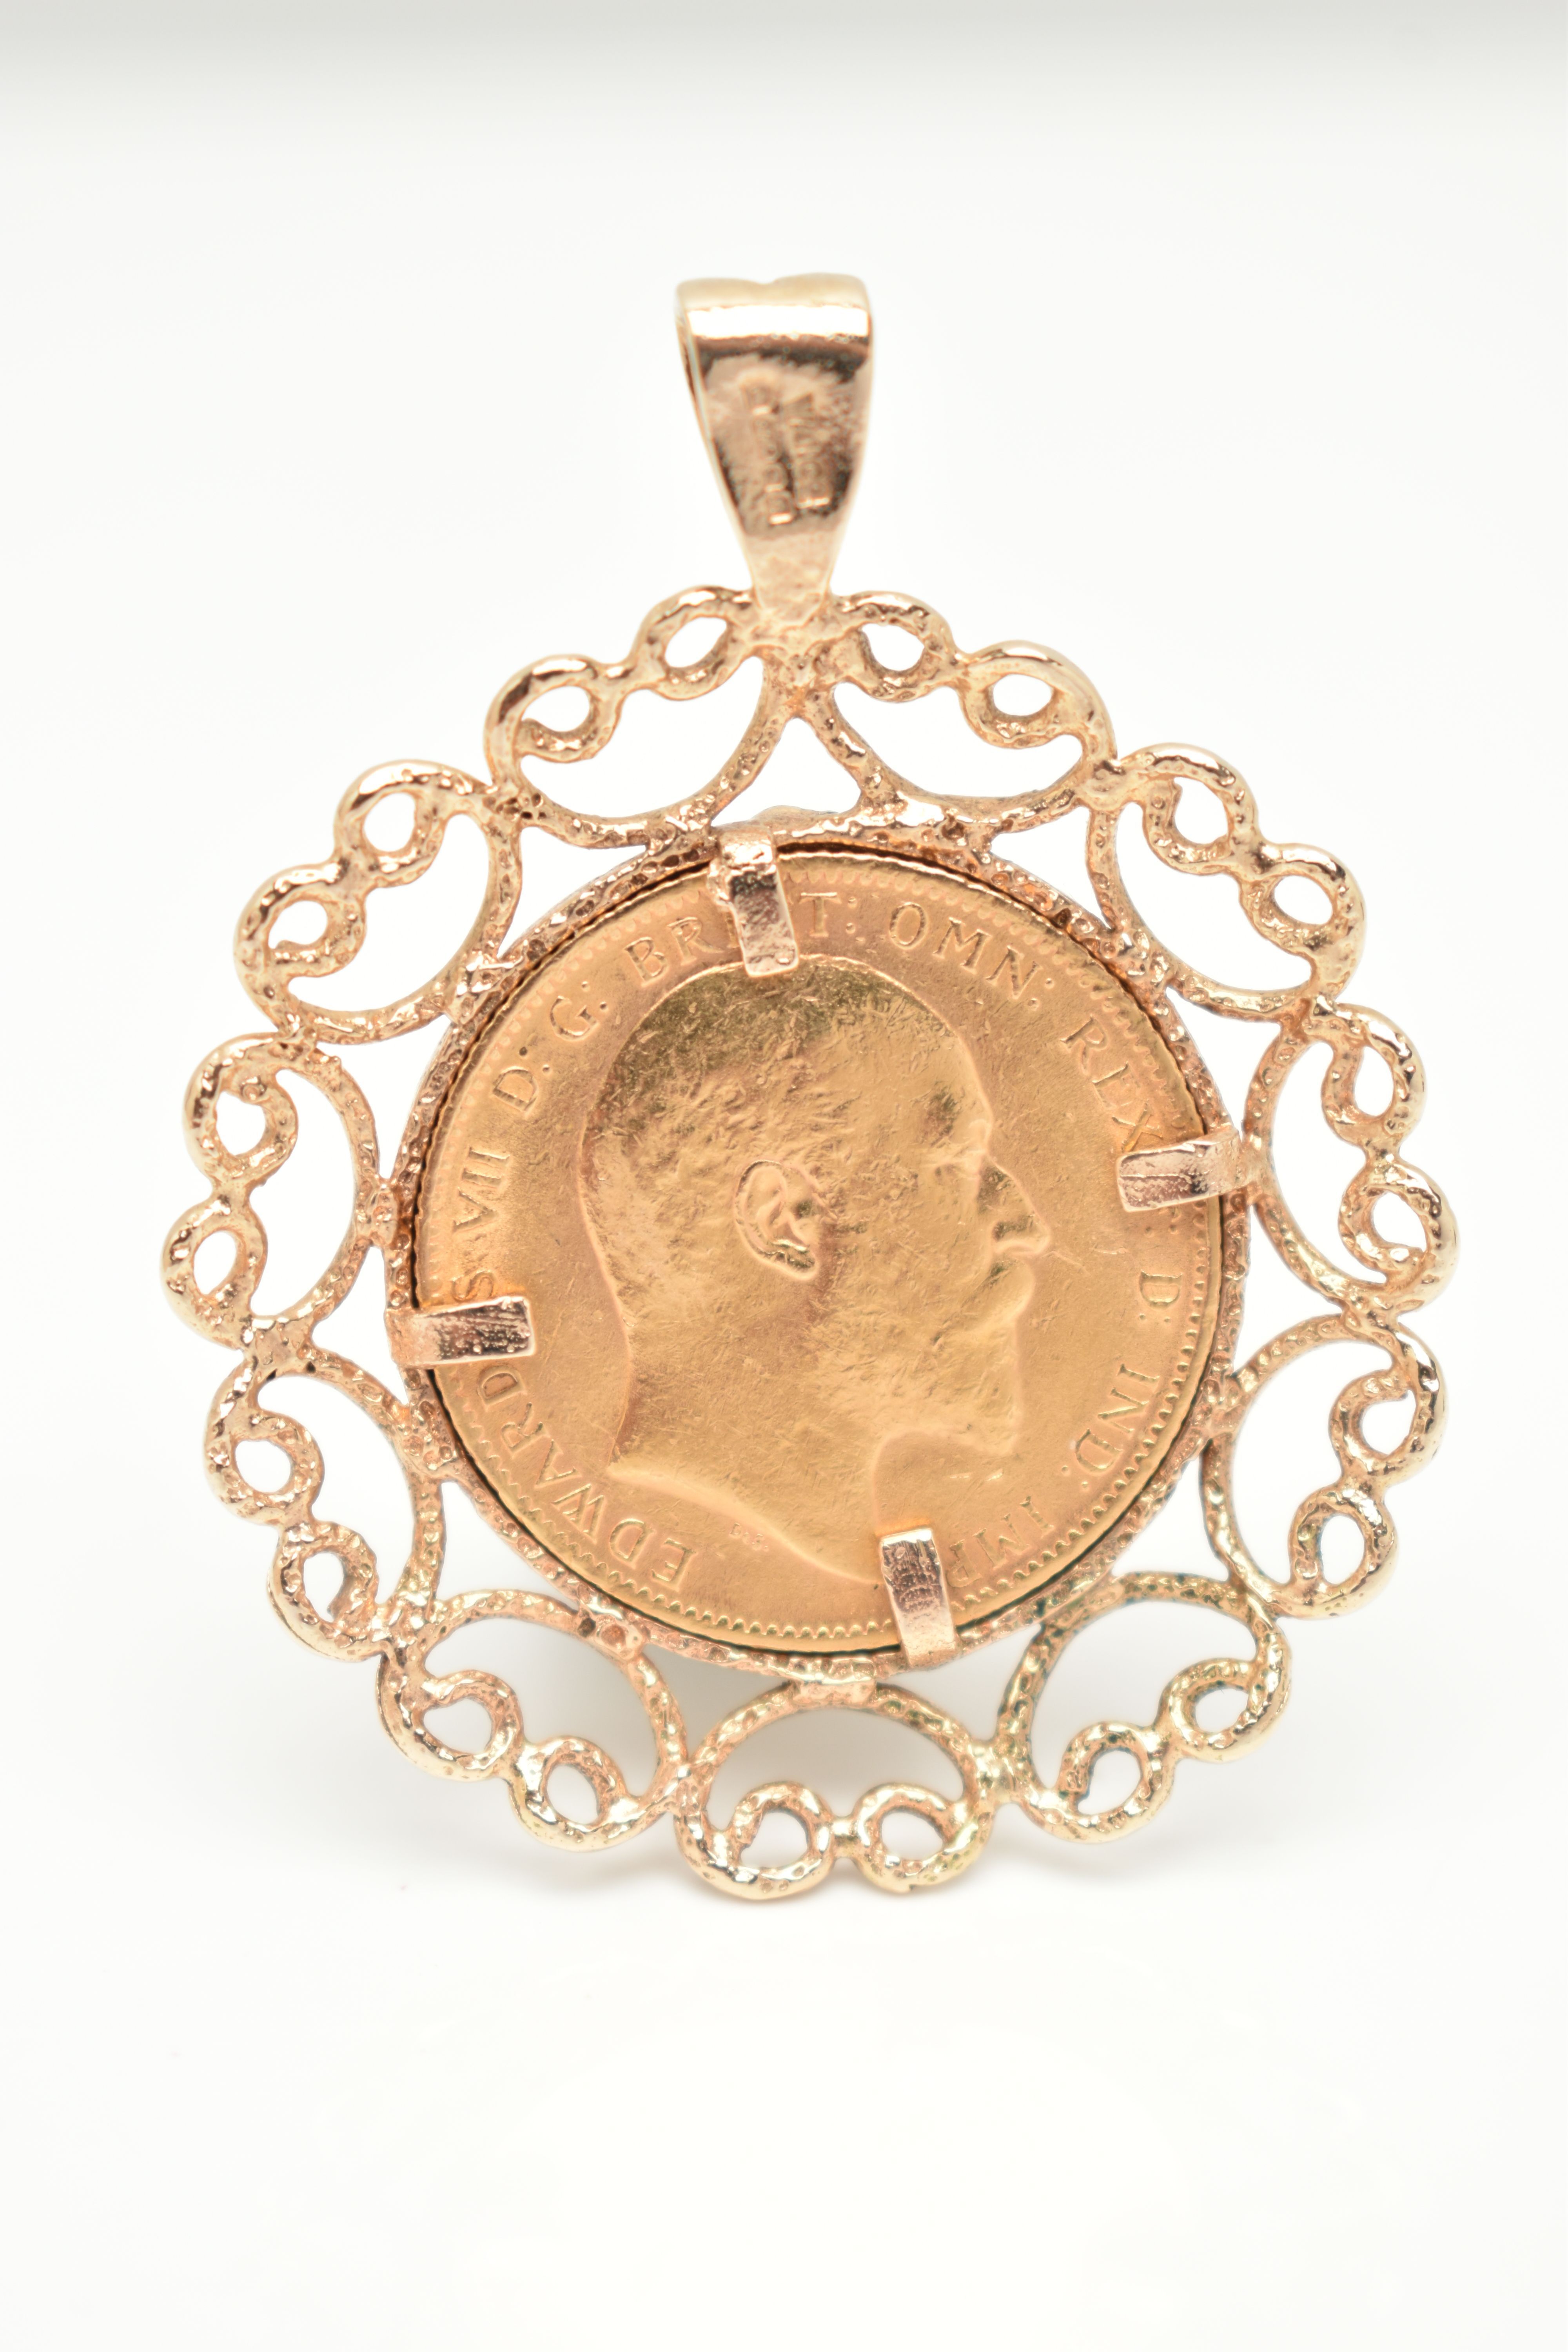 A MOUNTED FULL SOVEREIGN COIN PENDANT, Edward VII sovereign dated 1903, textured collet setting - Image 2 of 2